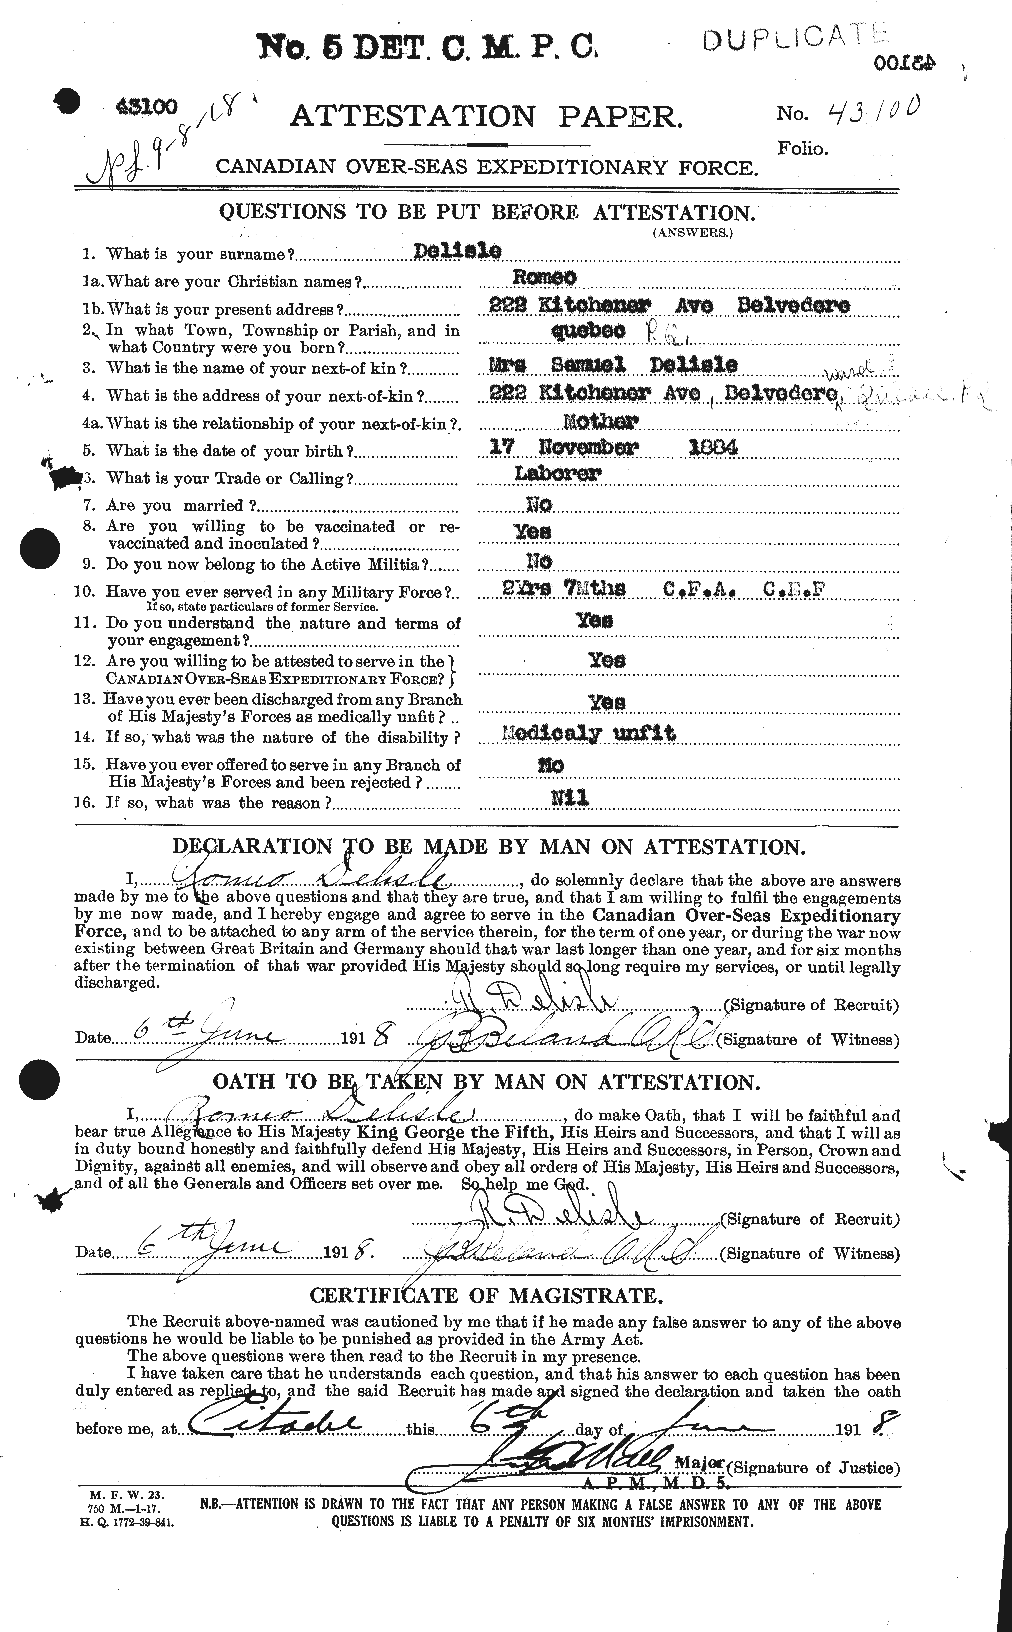 Personnel Records of the First World War - CEF 286641a